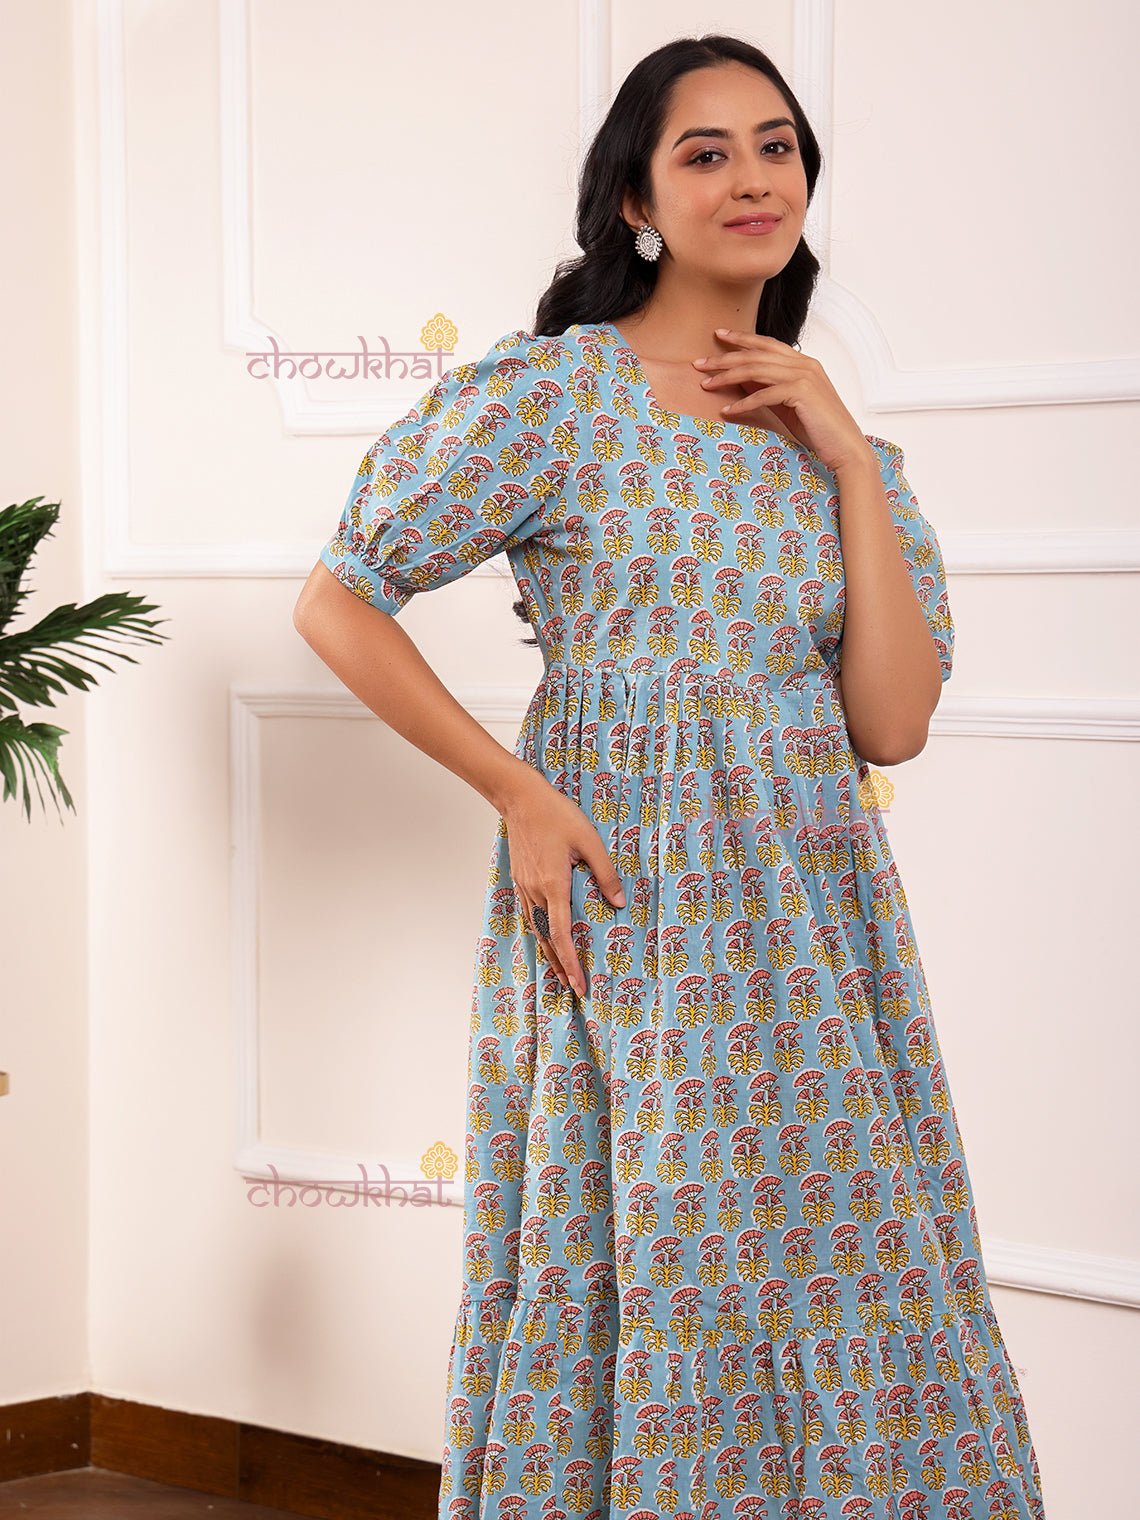 Leher Hand Printed Cotton Dress - Chowkhat Lifestyle